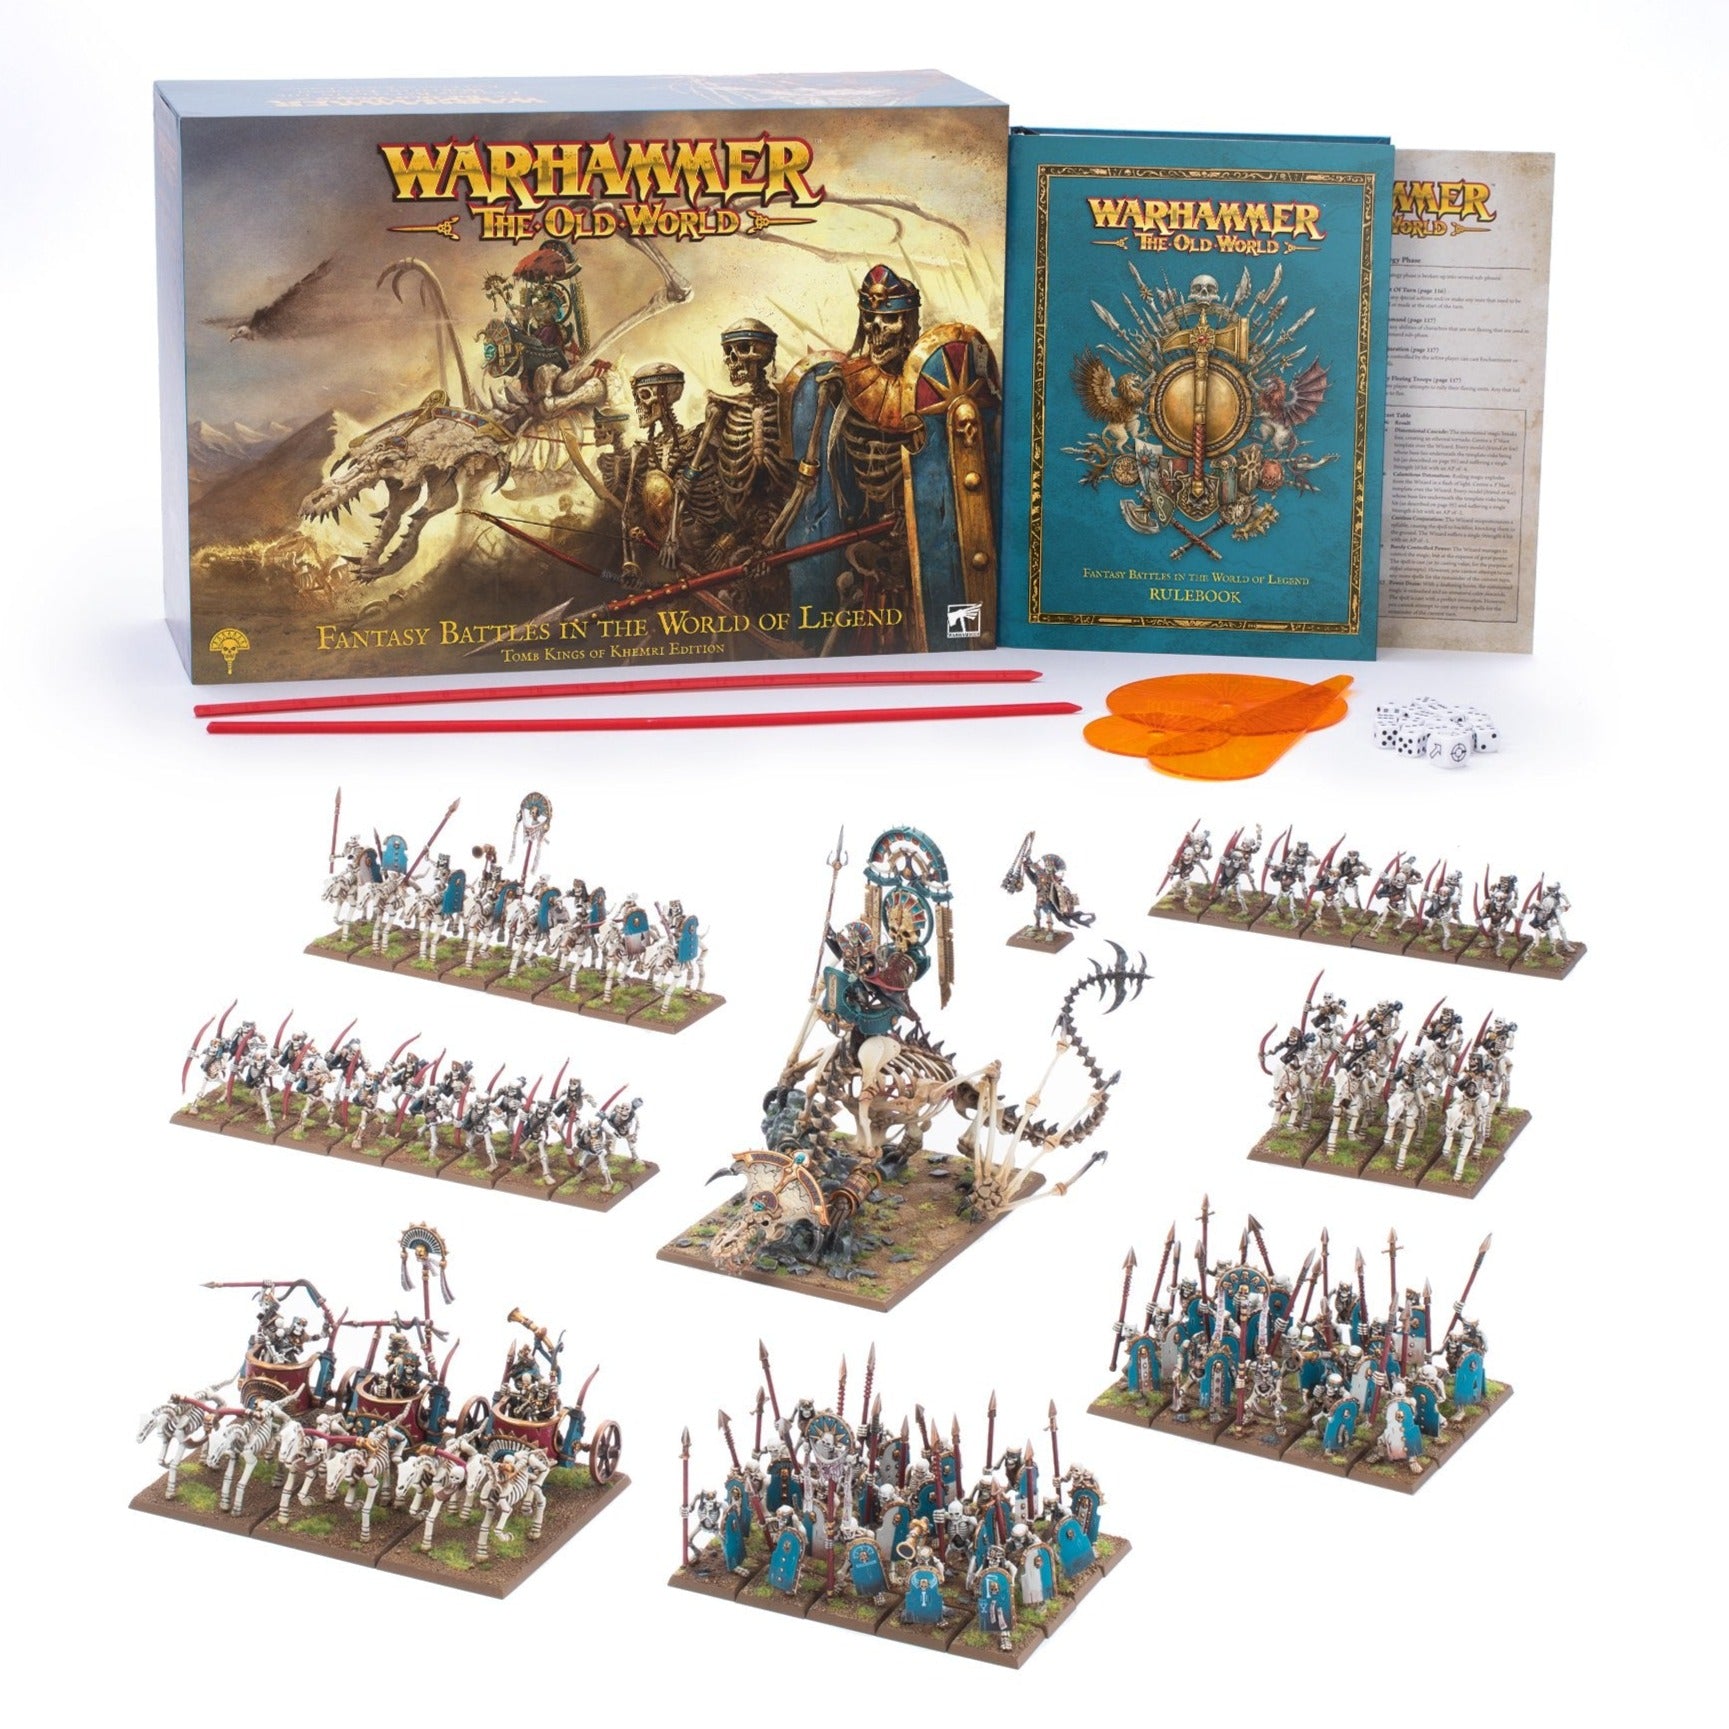 Warhammer: The Old World - Tomb Kings Of Khemri - Release Date 20/1/24 - Loaded Dice Barry Vale of Glamorgan CF64 3HD